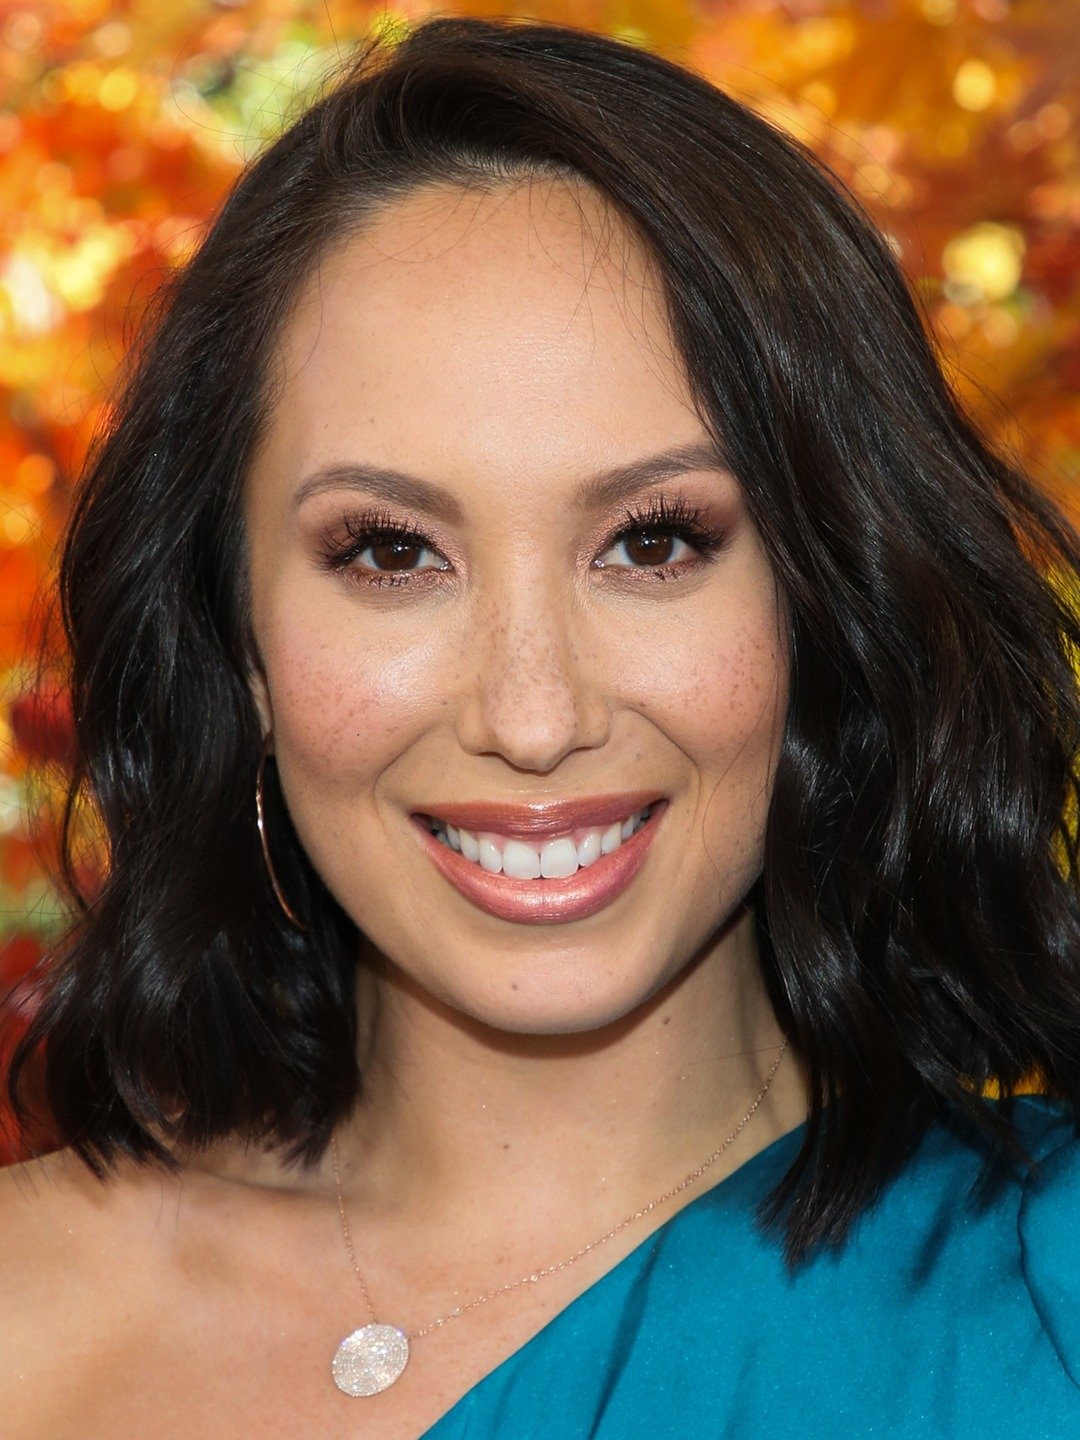 Cheryl Burke made a shocking announcement about her career